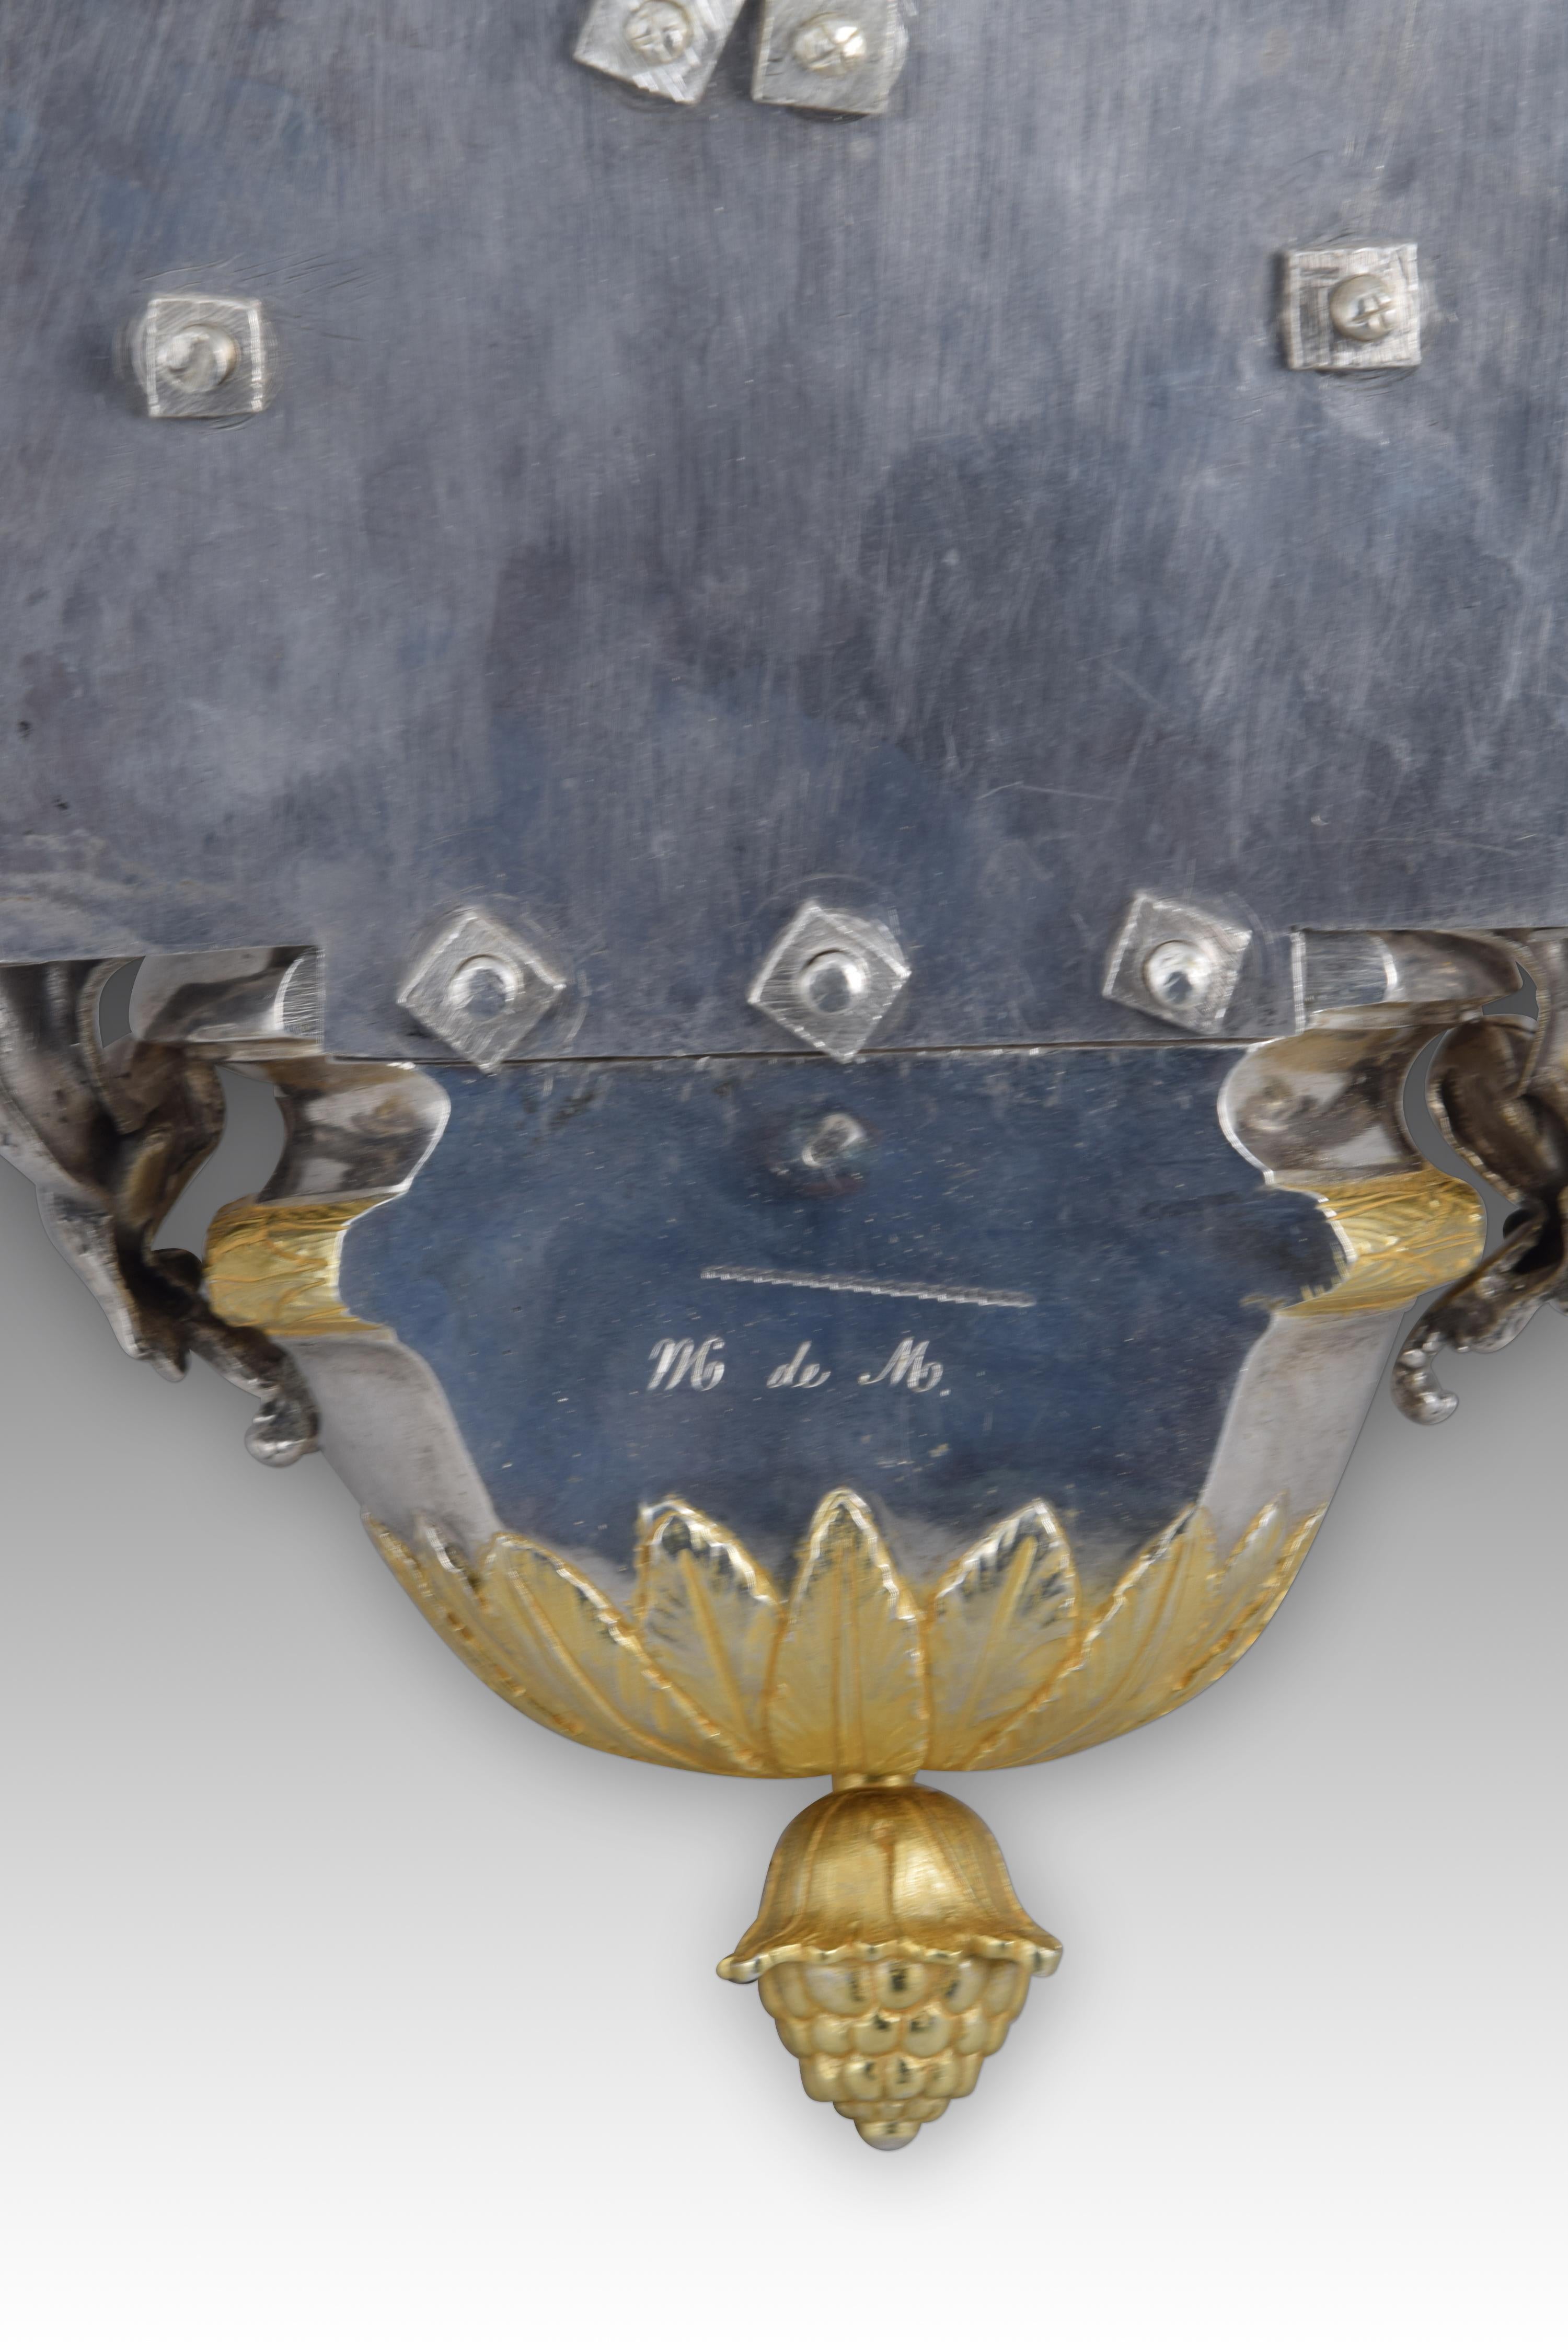 Silver Holy Water font or stoup. GUILLA. Madrid, 1780. 10